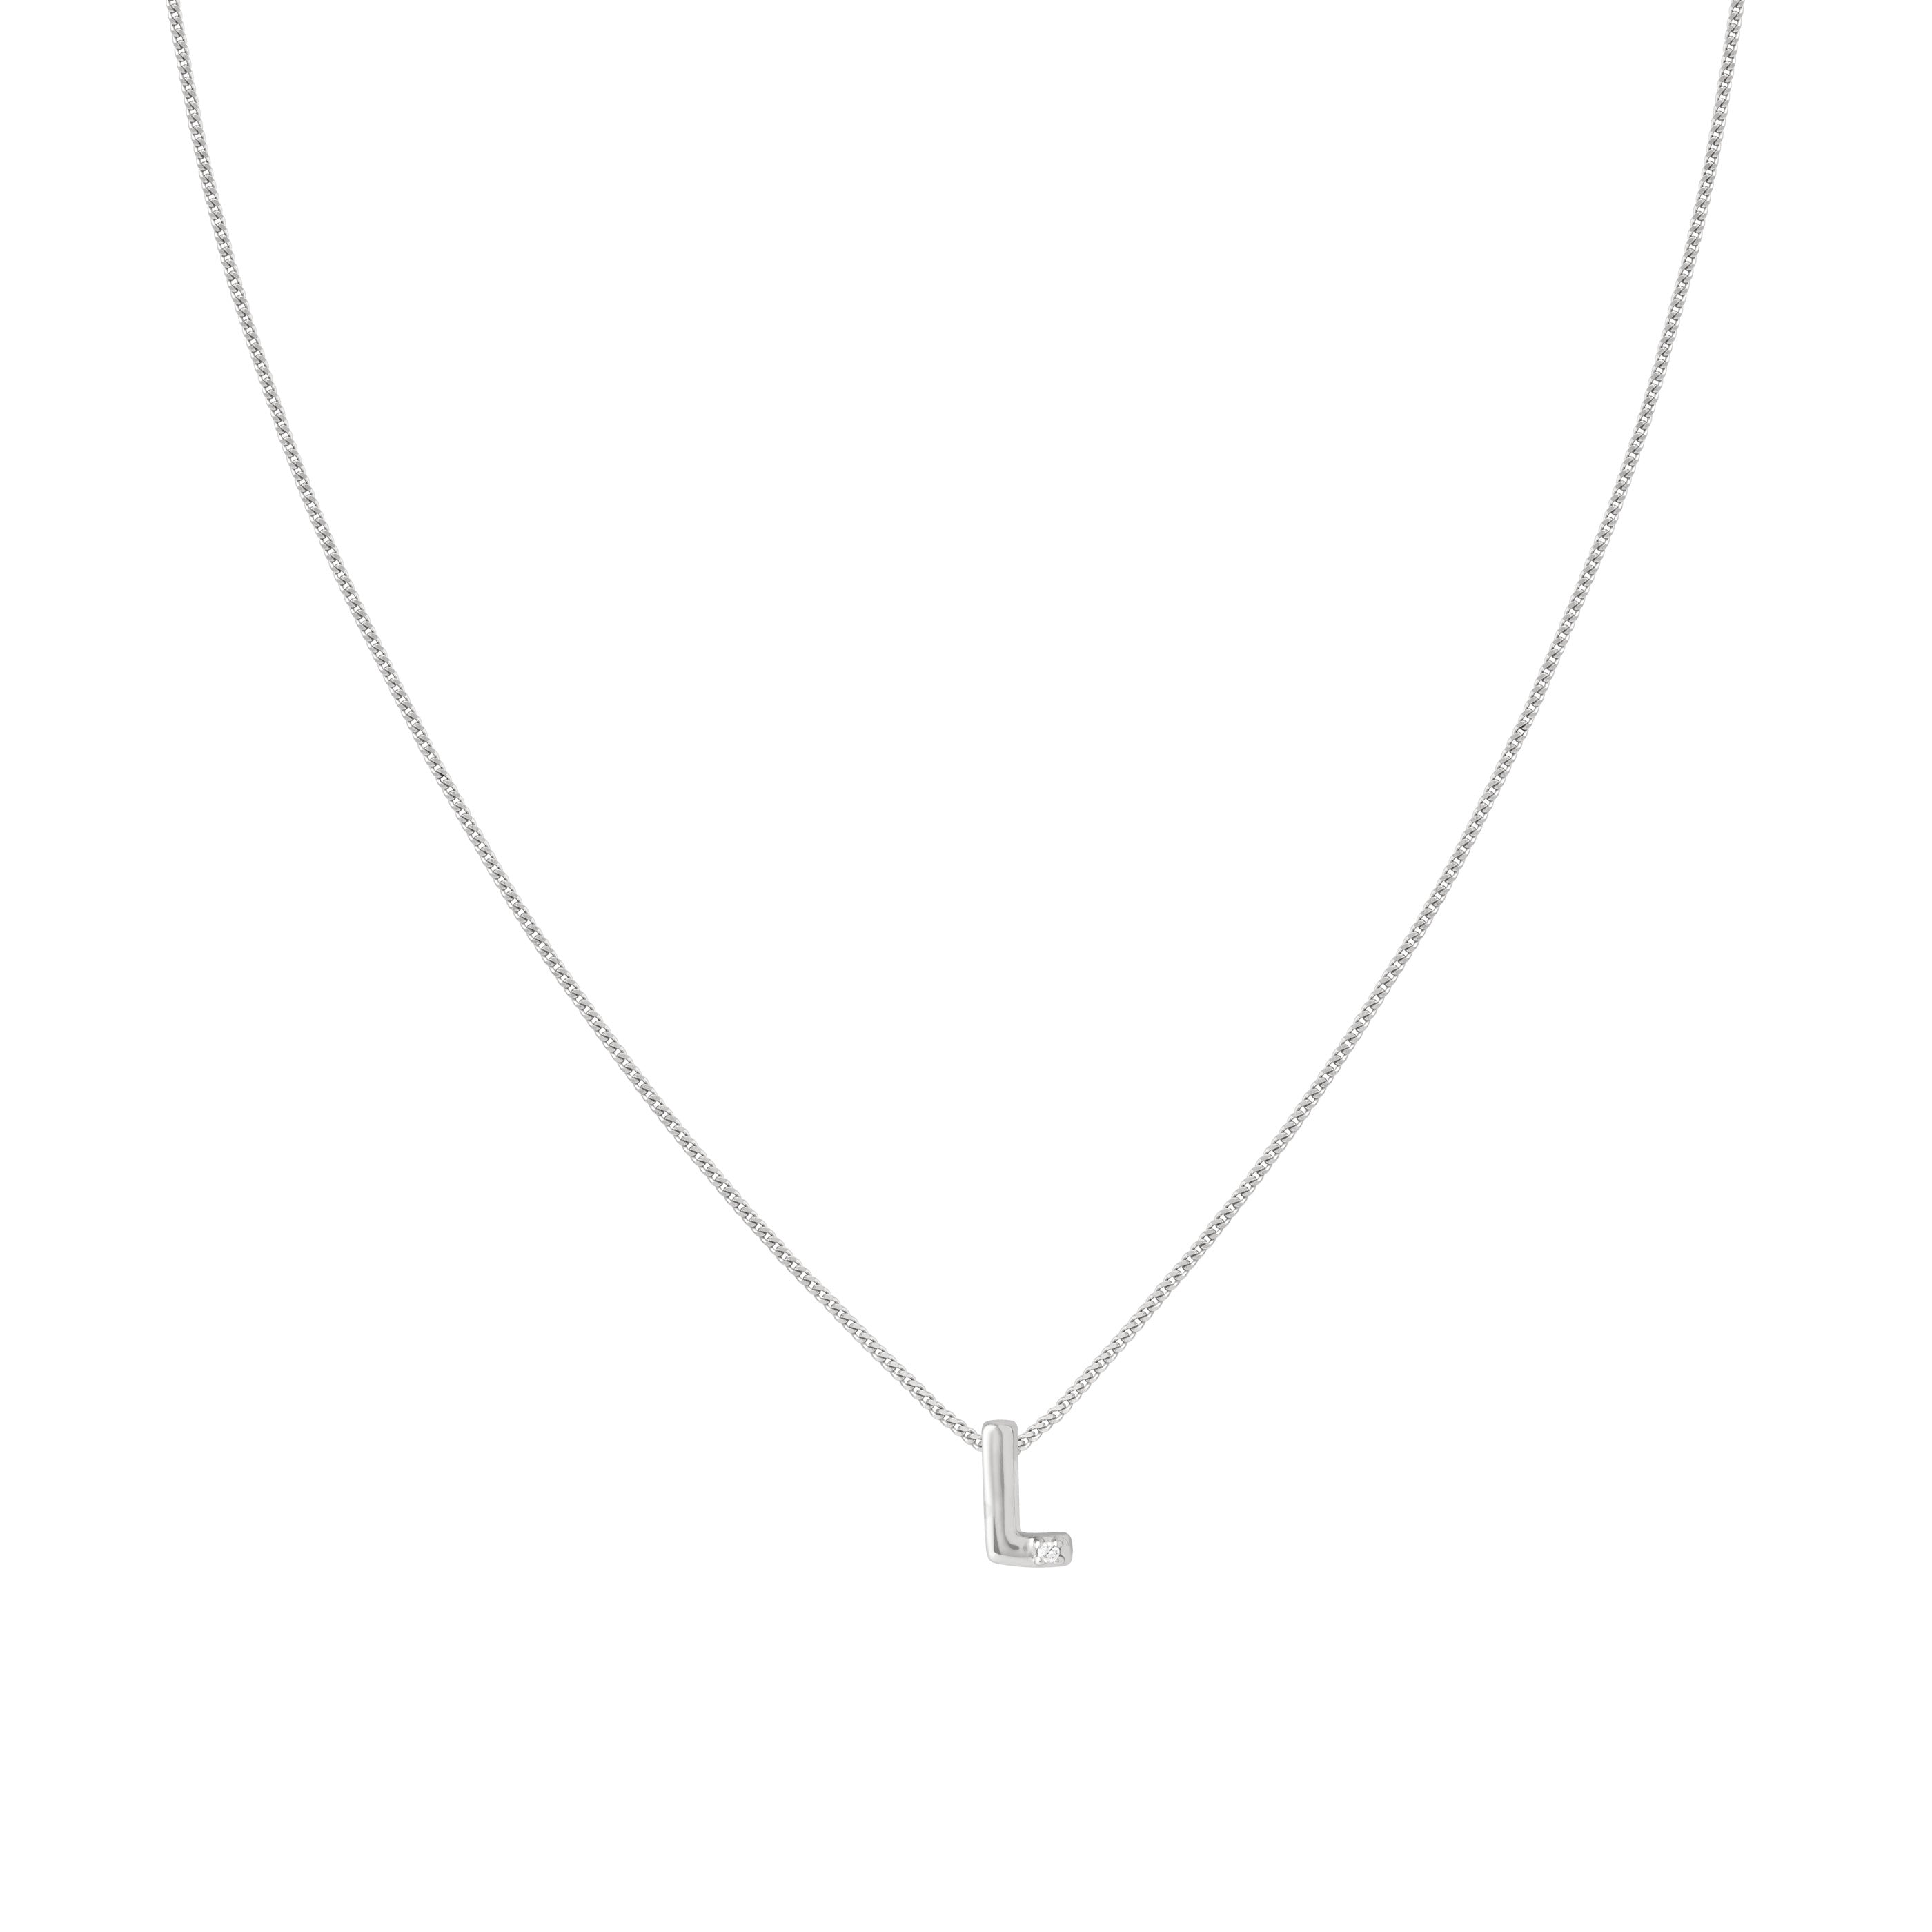 L Initial Pendant Necklace in Silver